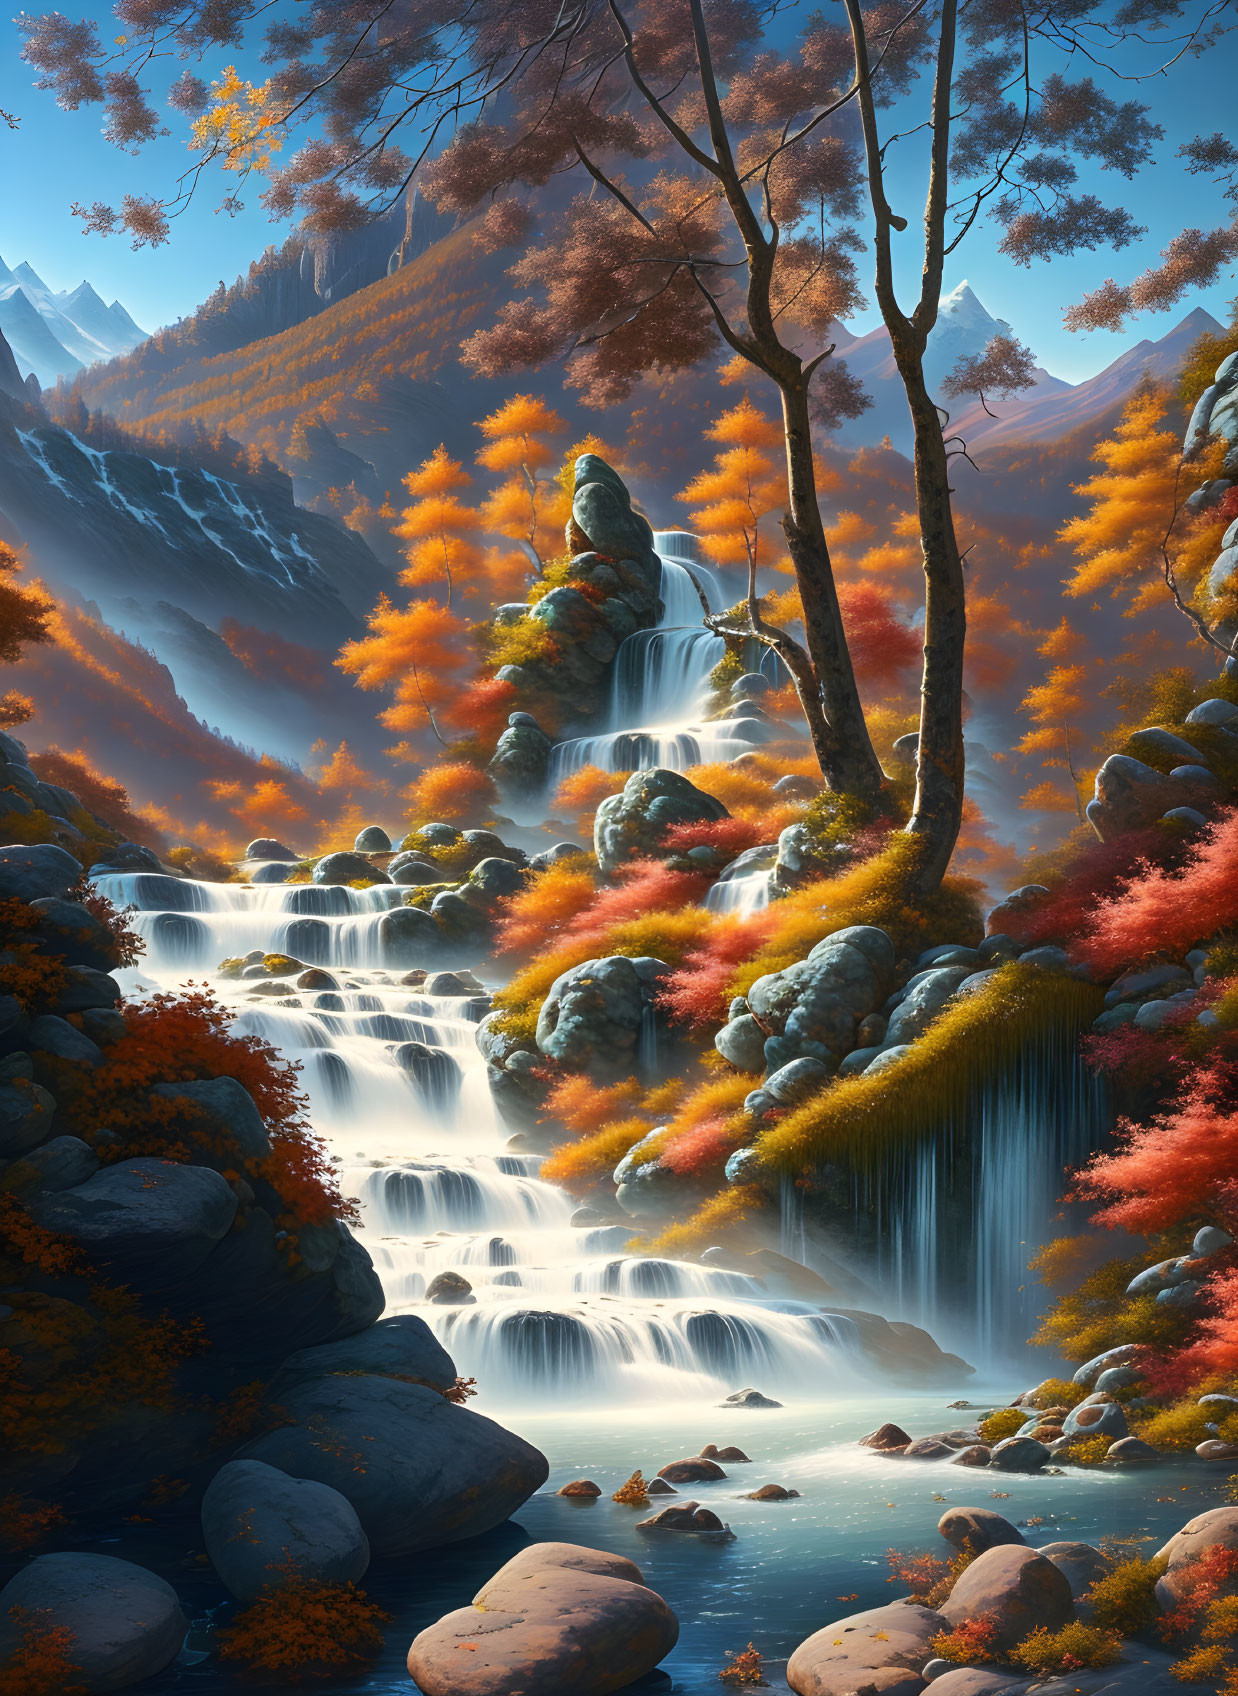 Vibrant autumn foliage and waterfall in mountainous landscape